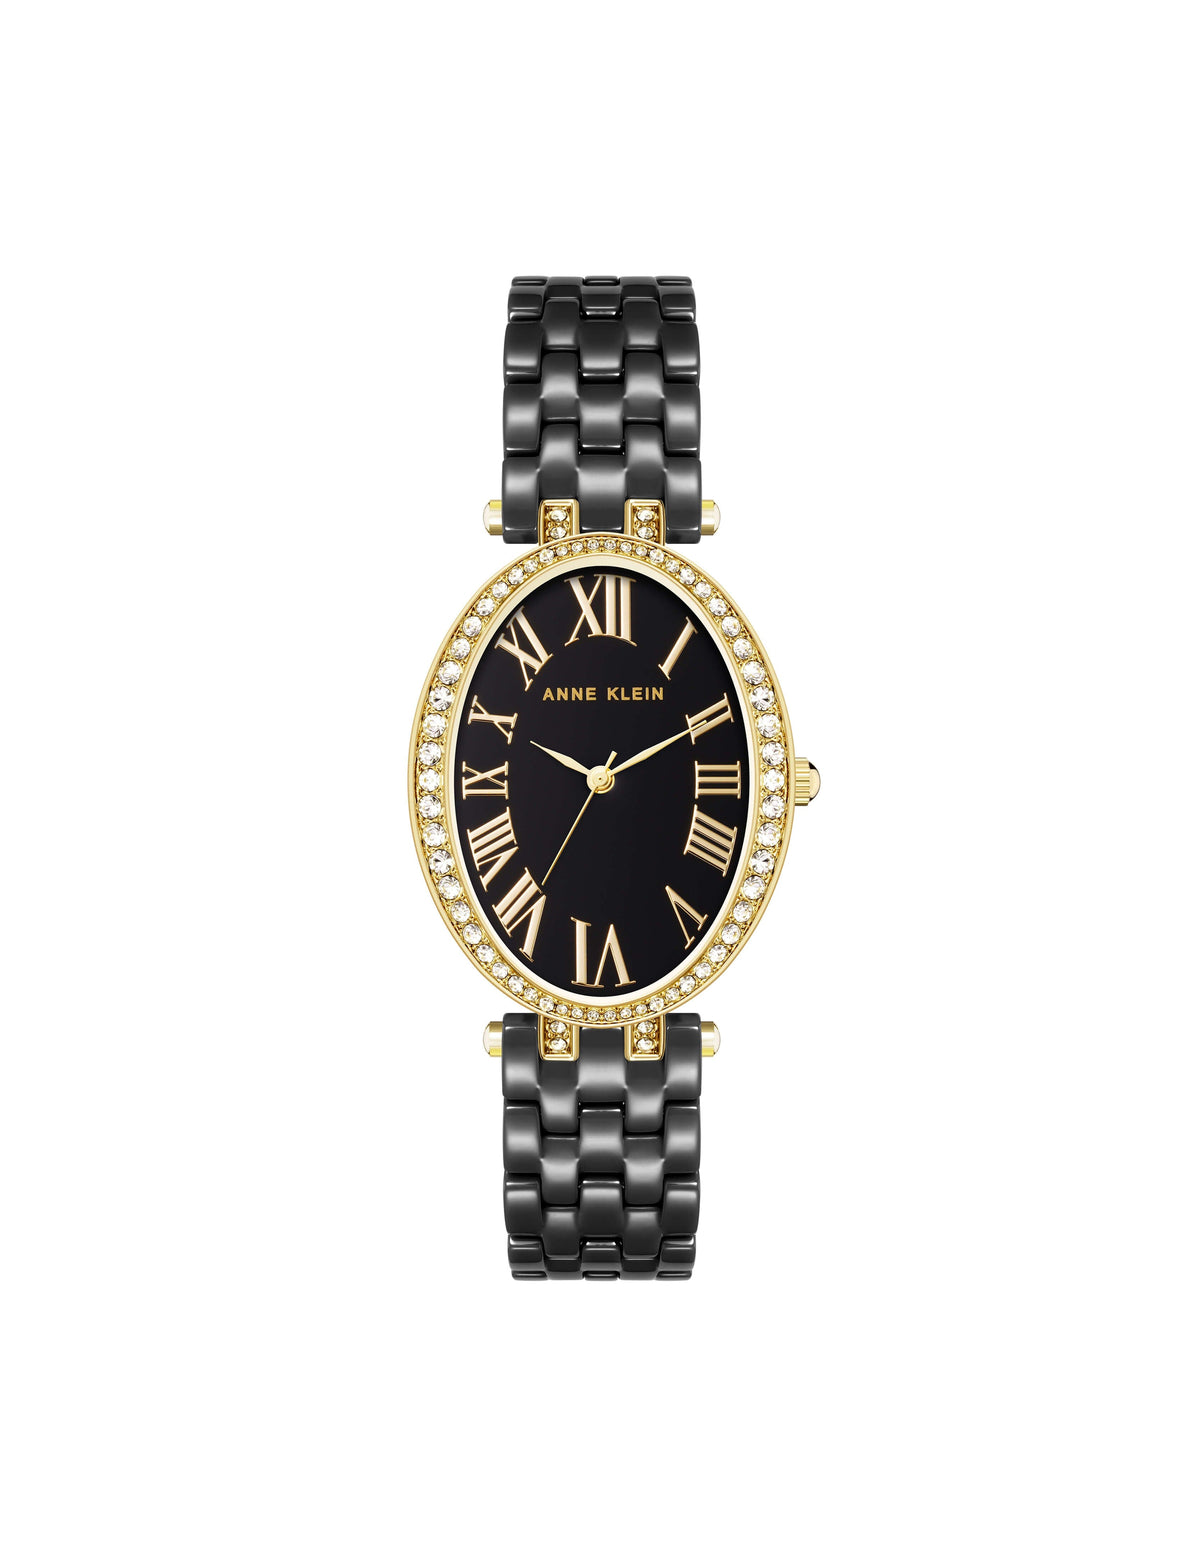 Anne Klein Black/ Gold-Tone Oval Crystal Accented Ceramic Bracelet Watch - Clearance